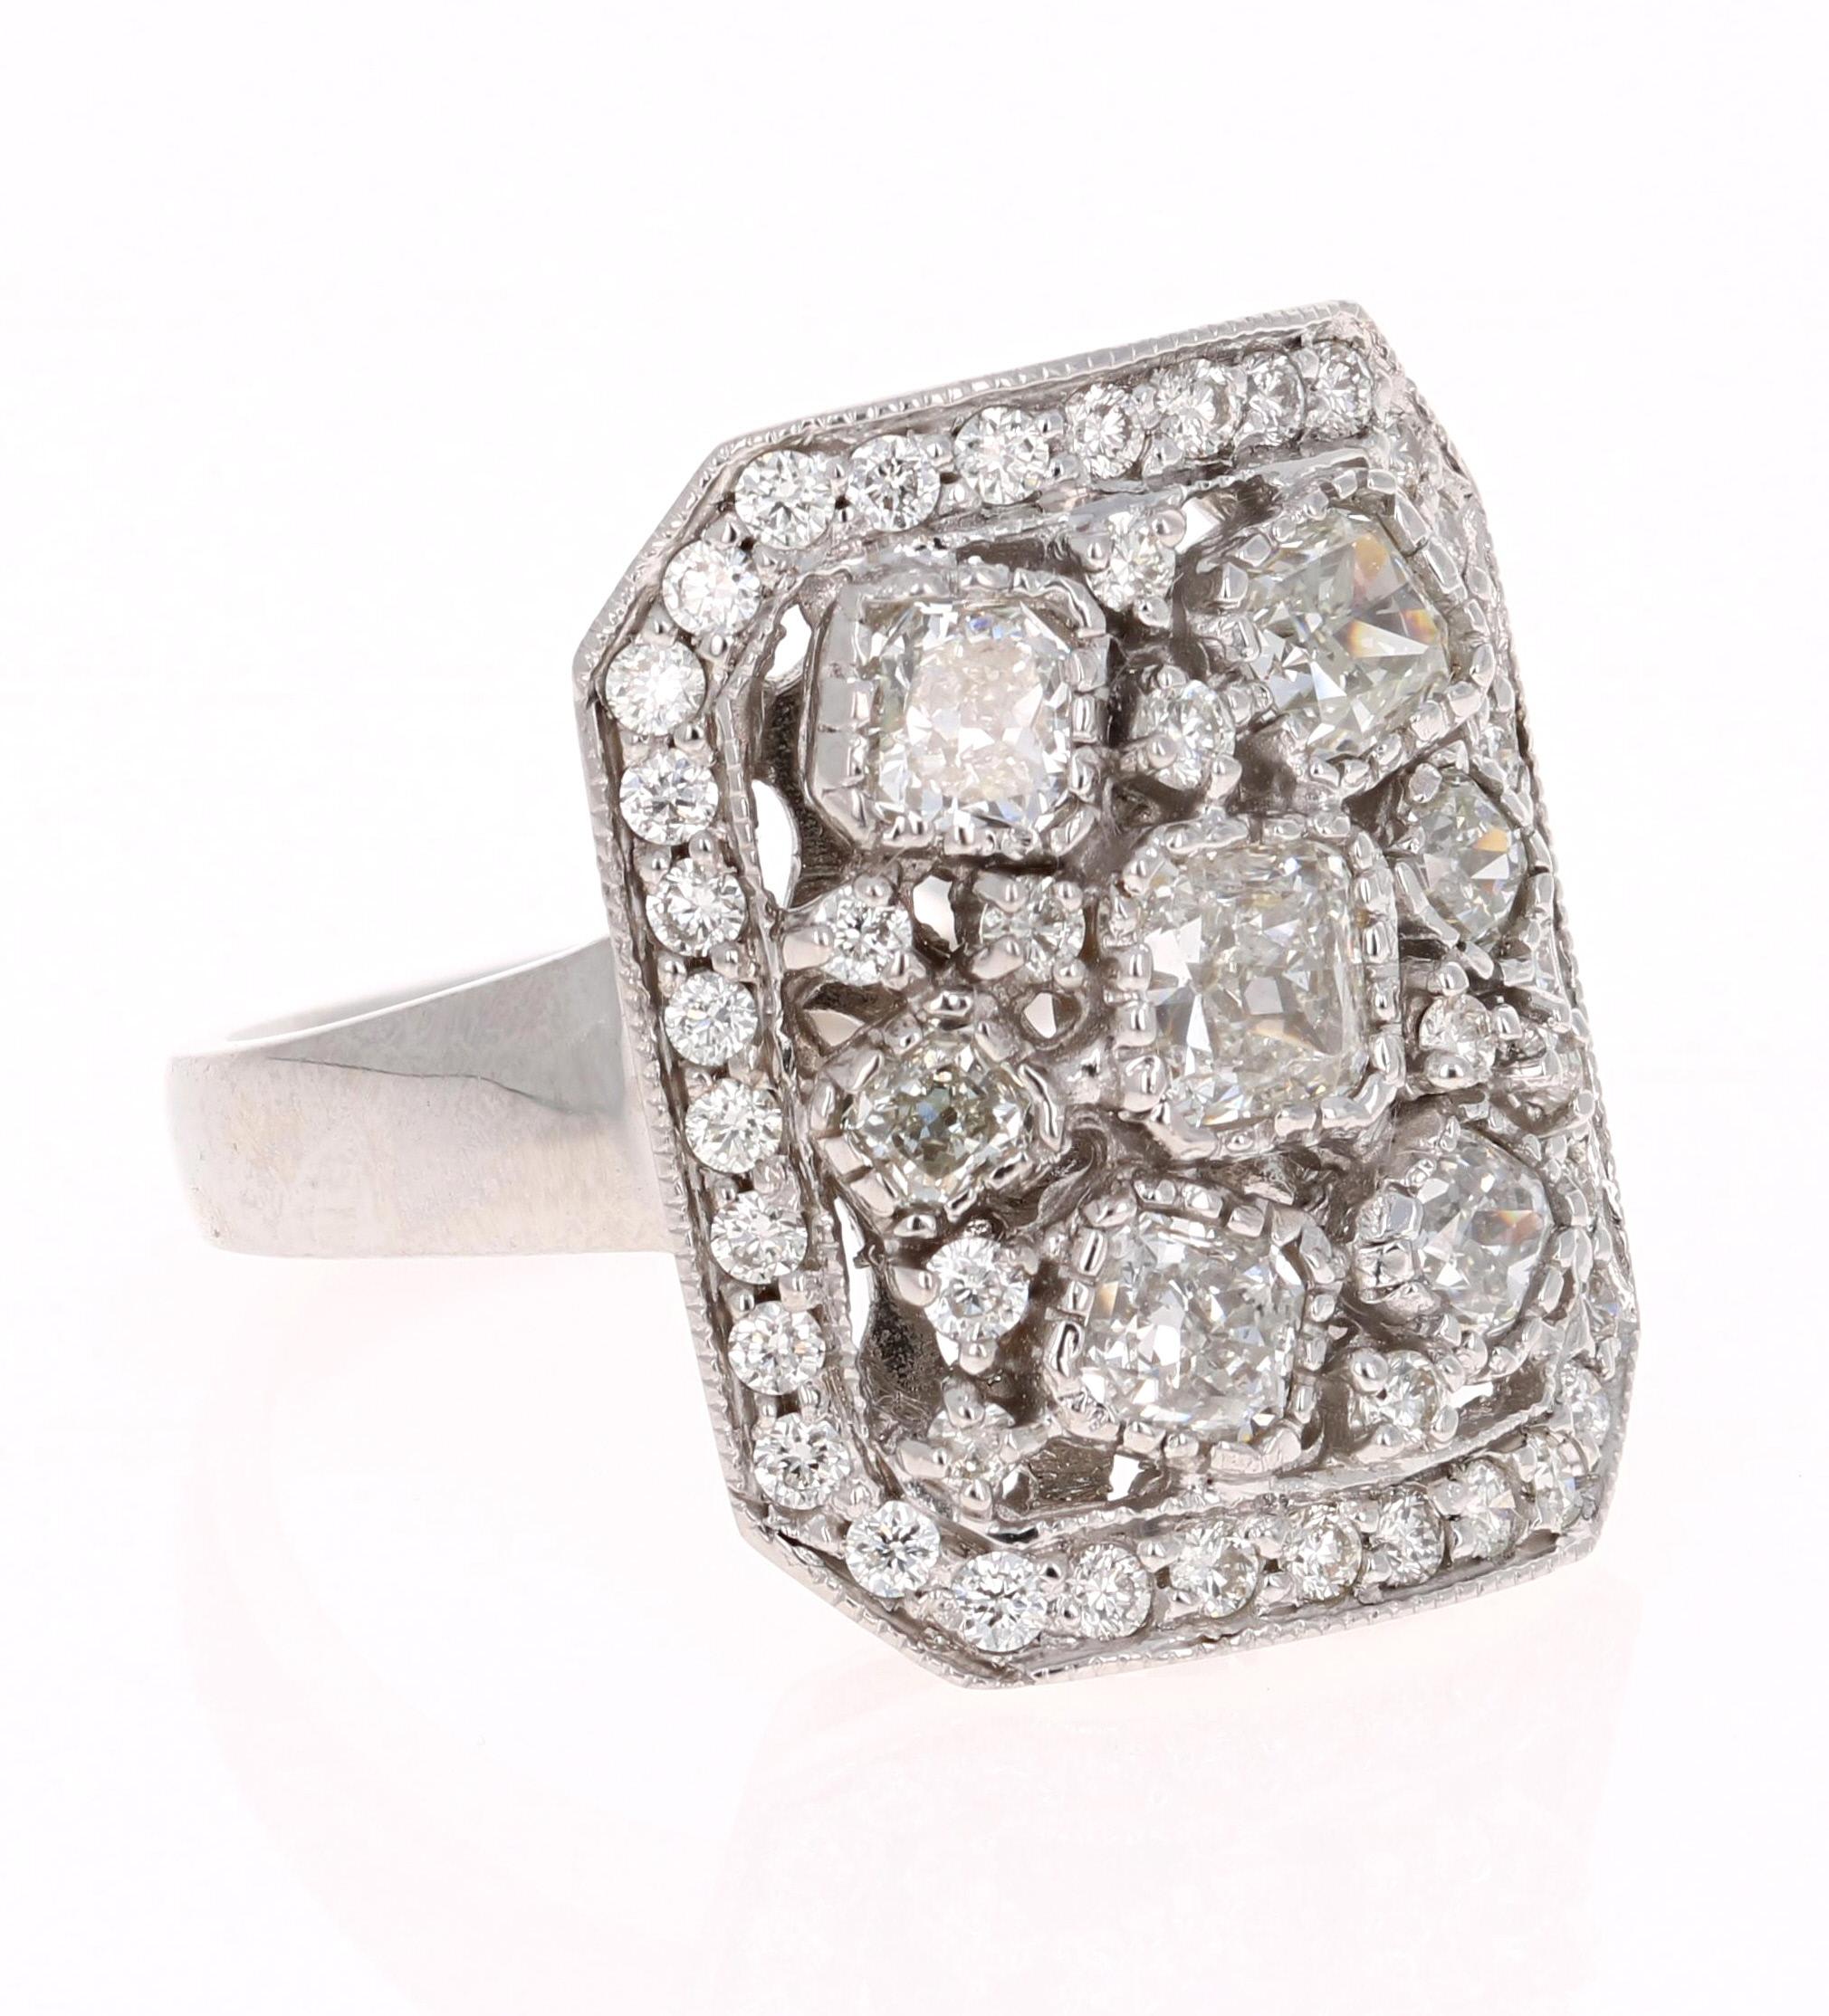 This unique and one of a kind cocktail ring has 7 Cushion Cut Diamonds that weigh 1.63 Carats and have a clarity and color of VS-G. The ring also has 43 Round Cut Diamonds that weigh 0.58 Carats. The total carat weight of the ring is 2.21 Carats.